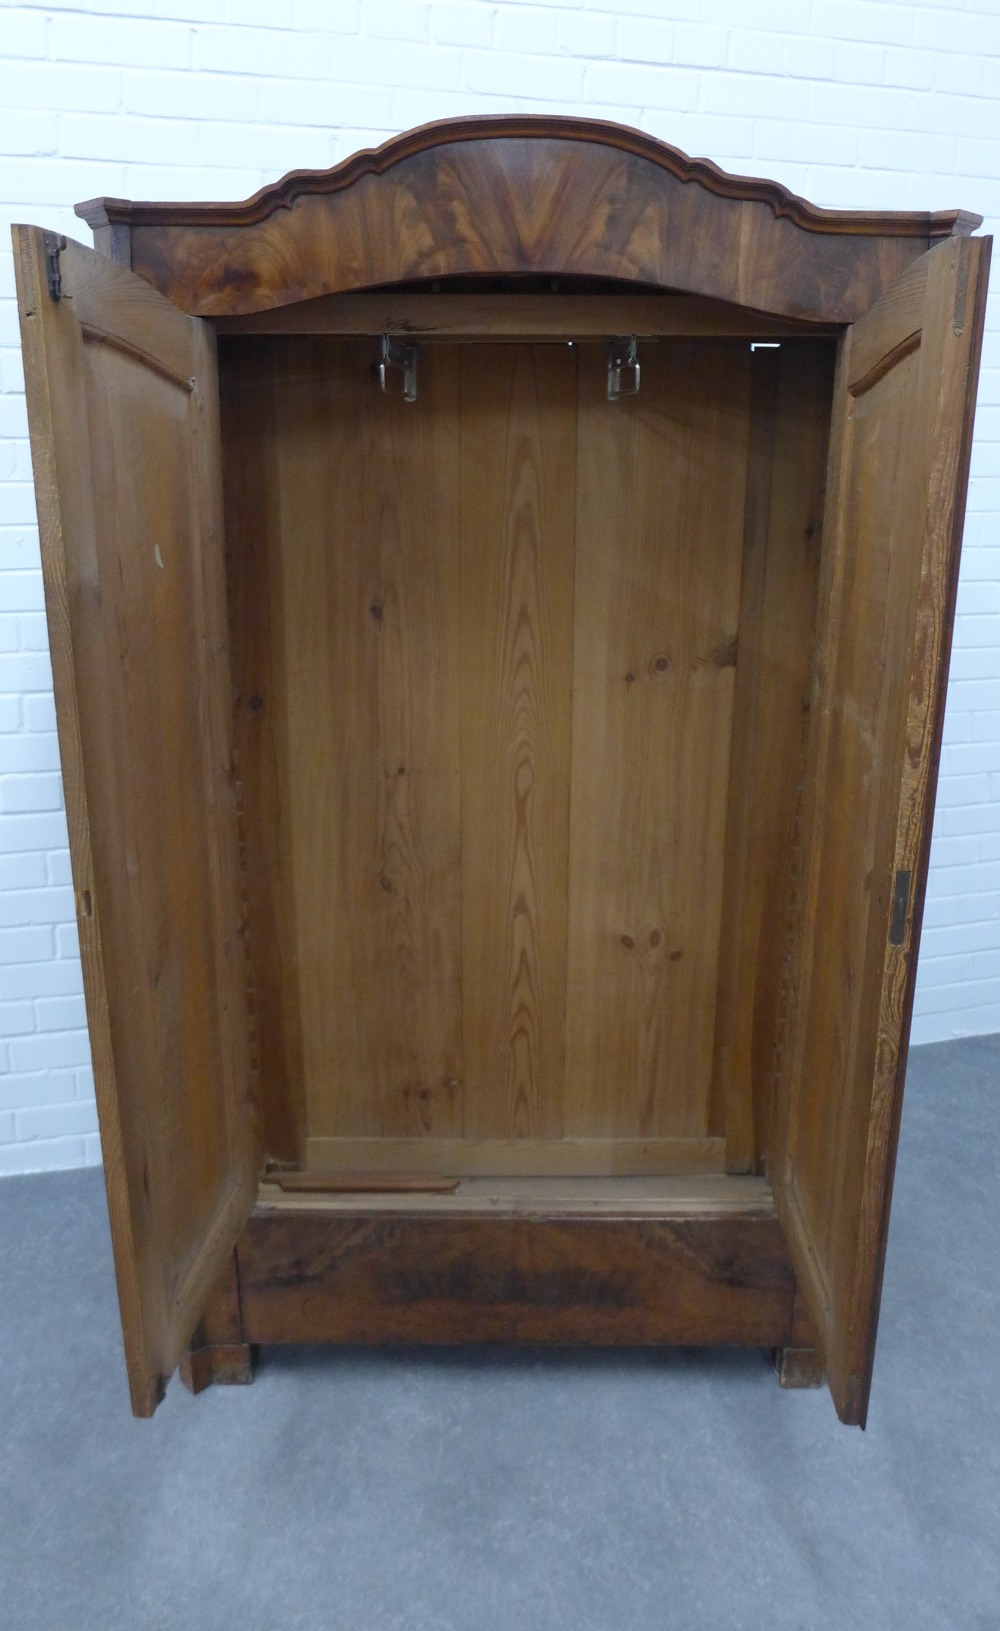 Late 19th / early 20th century flame mahogany, two door wardrobe of neat proportions, 182 x 109 x - Image 4 of 4